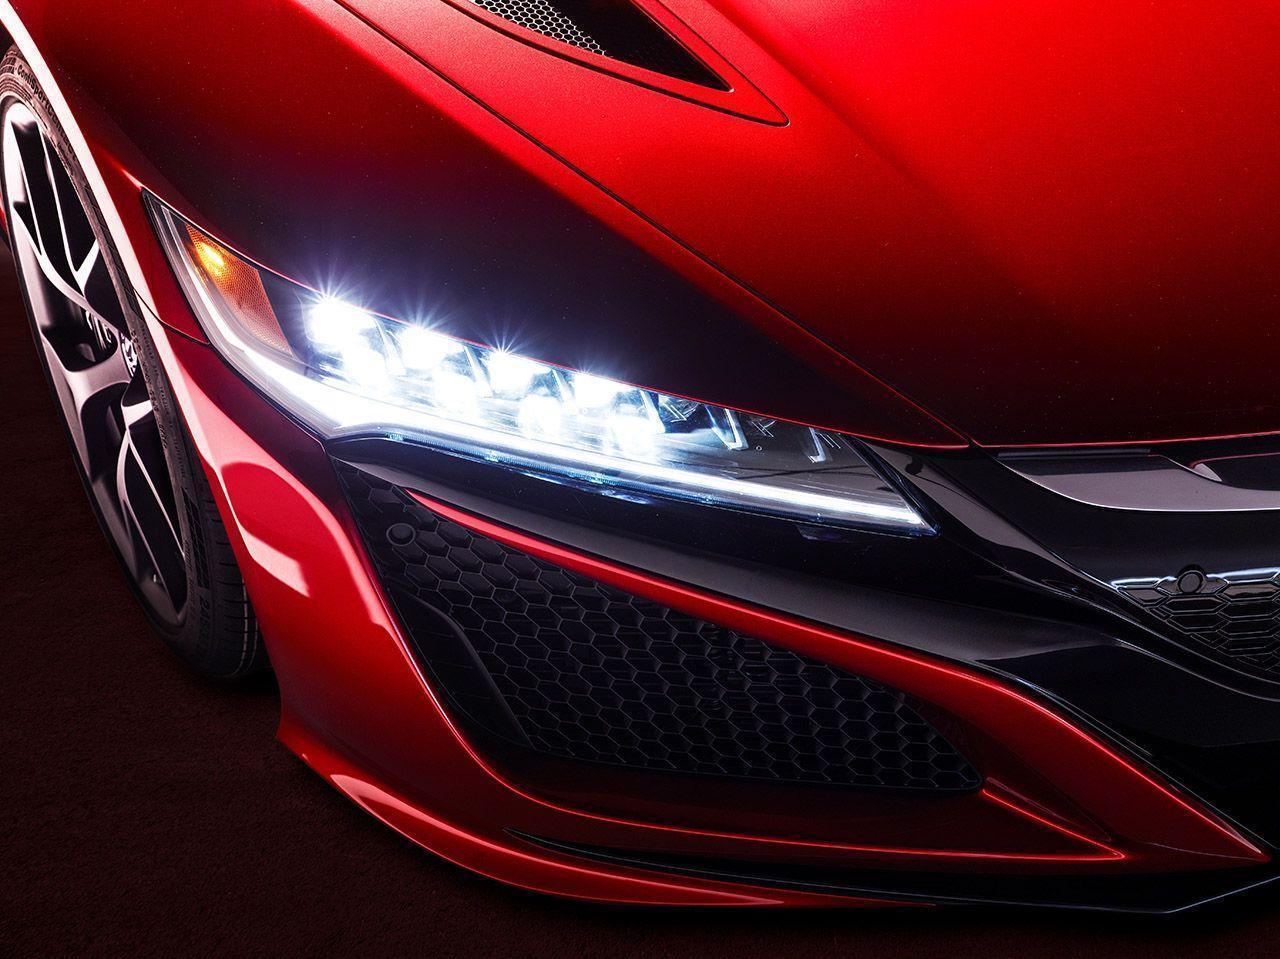 2017 Acura NSX Hd Wallpaper 4k For Pc